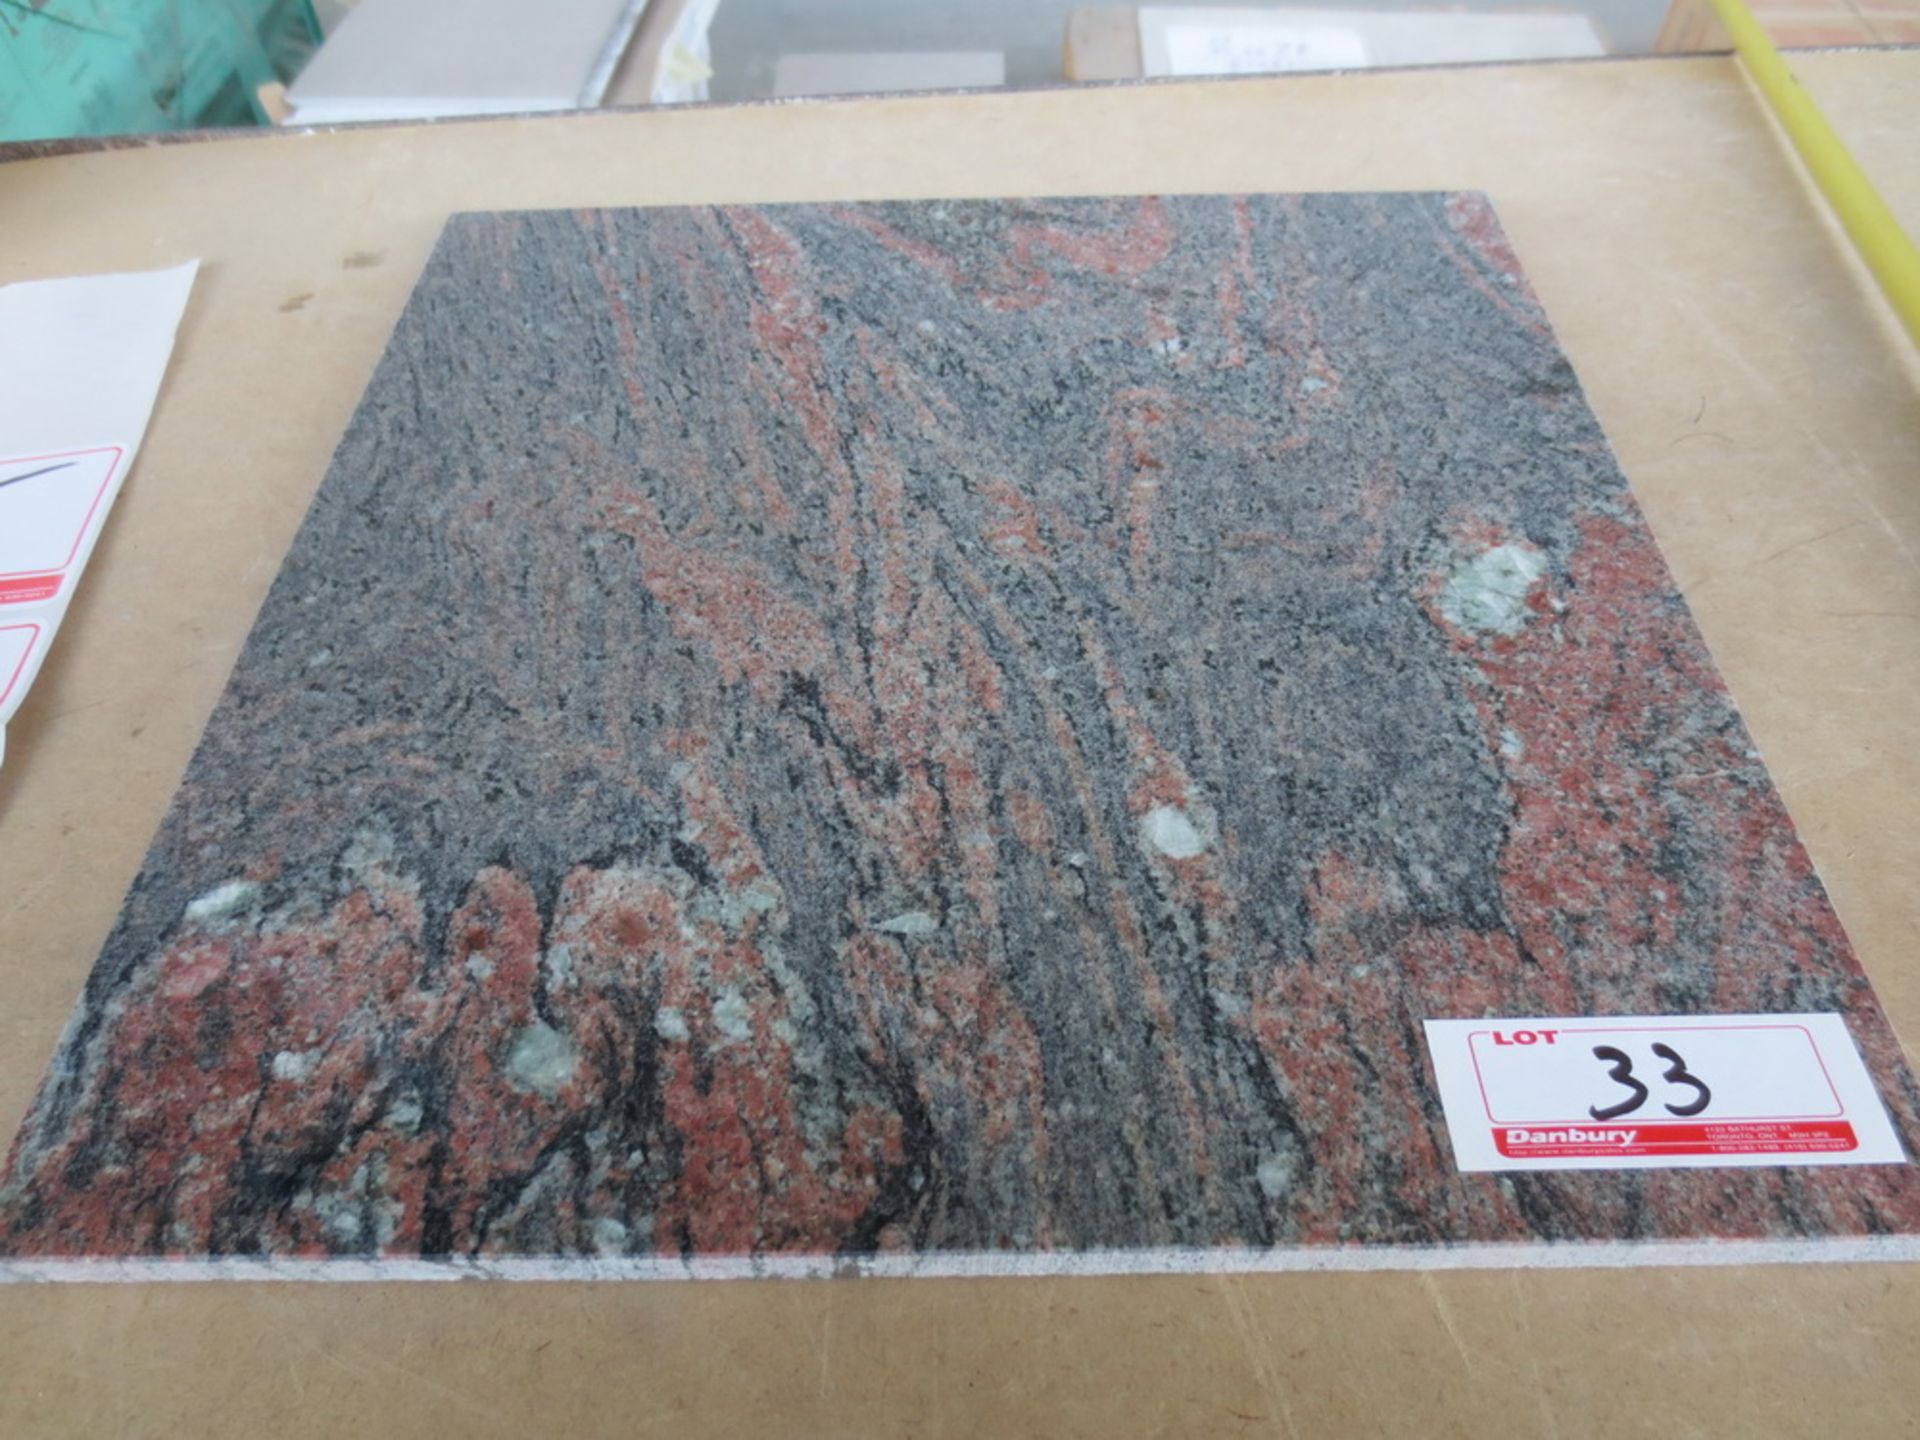 340 - SQ. FT. TROPICAL RED APPROX 12X12 GRANITE TILE 34 BOXES